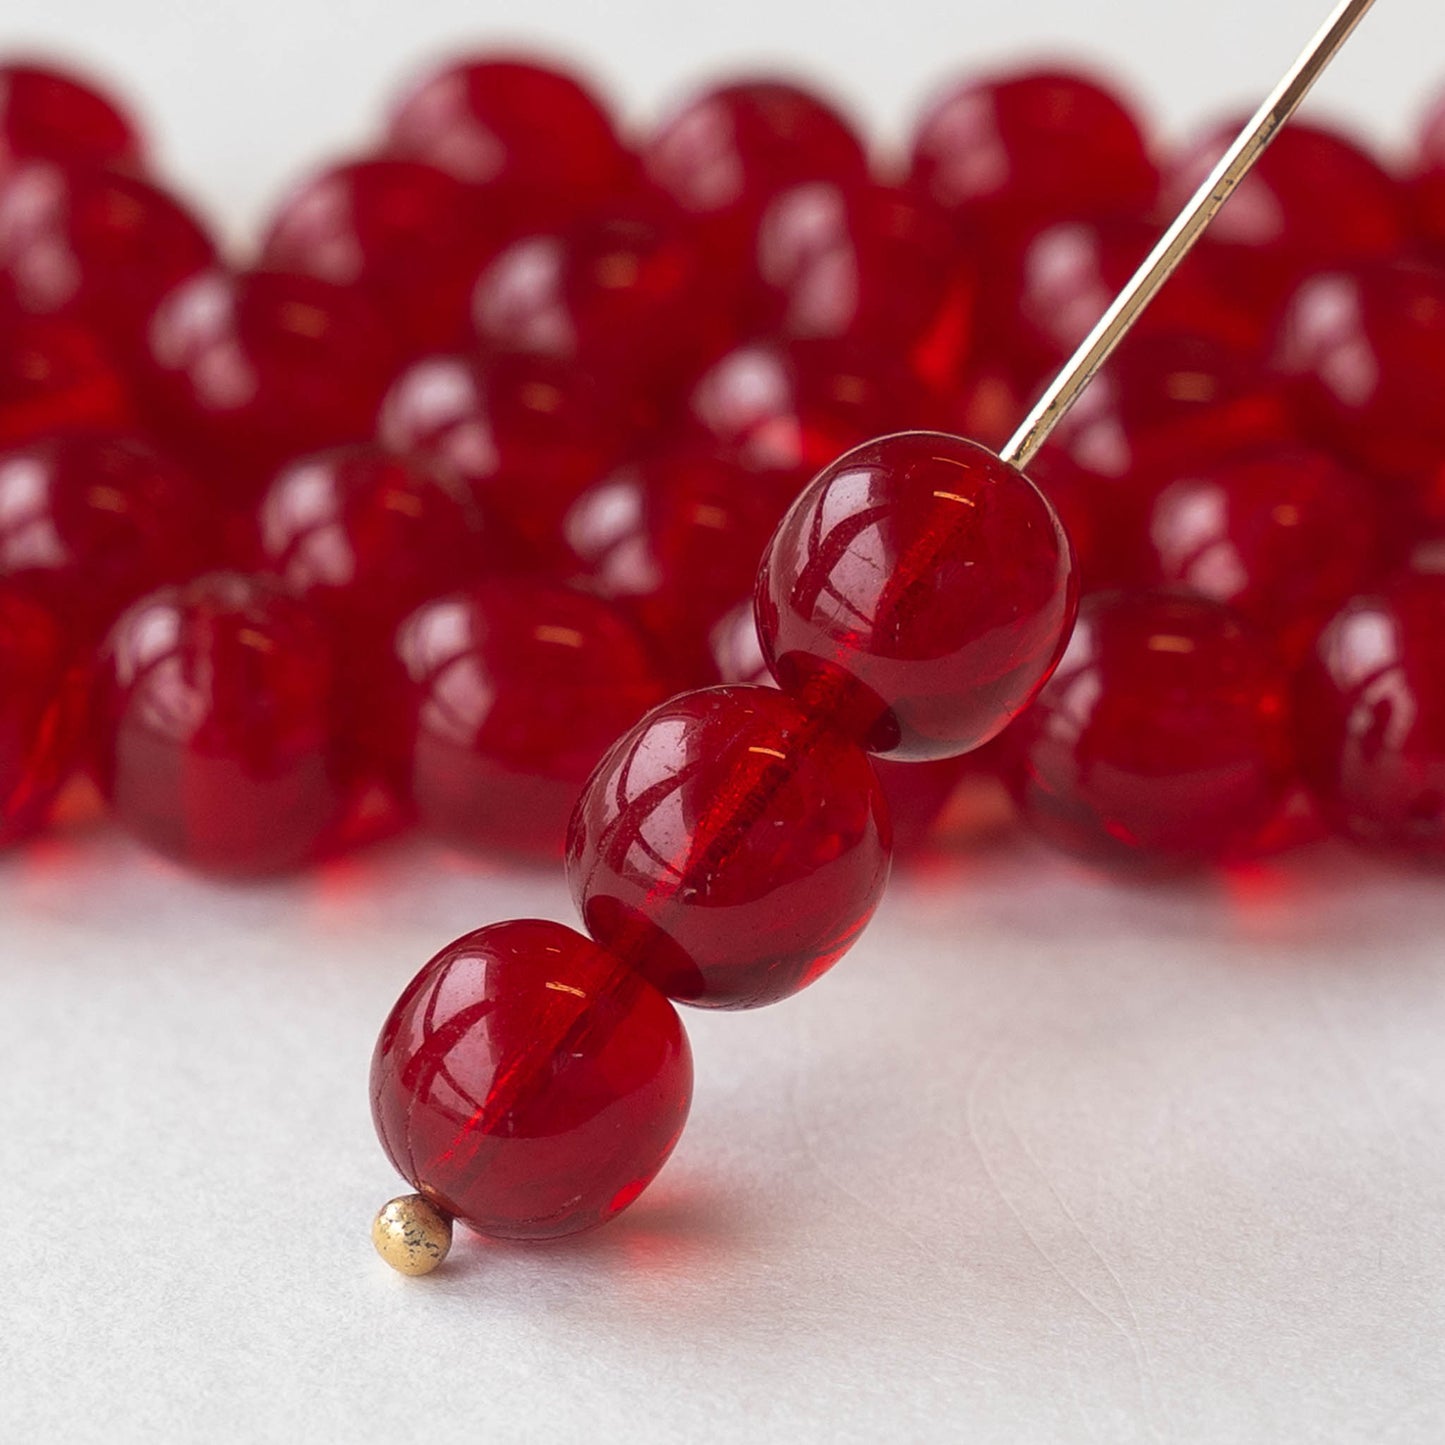 8mm Round Glass Beads - Transparent Red - 60